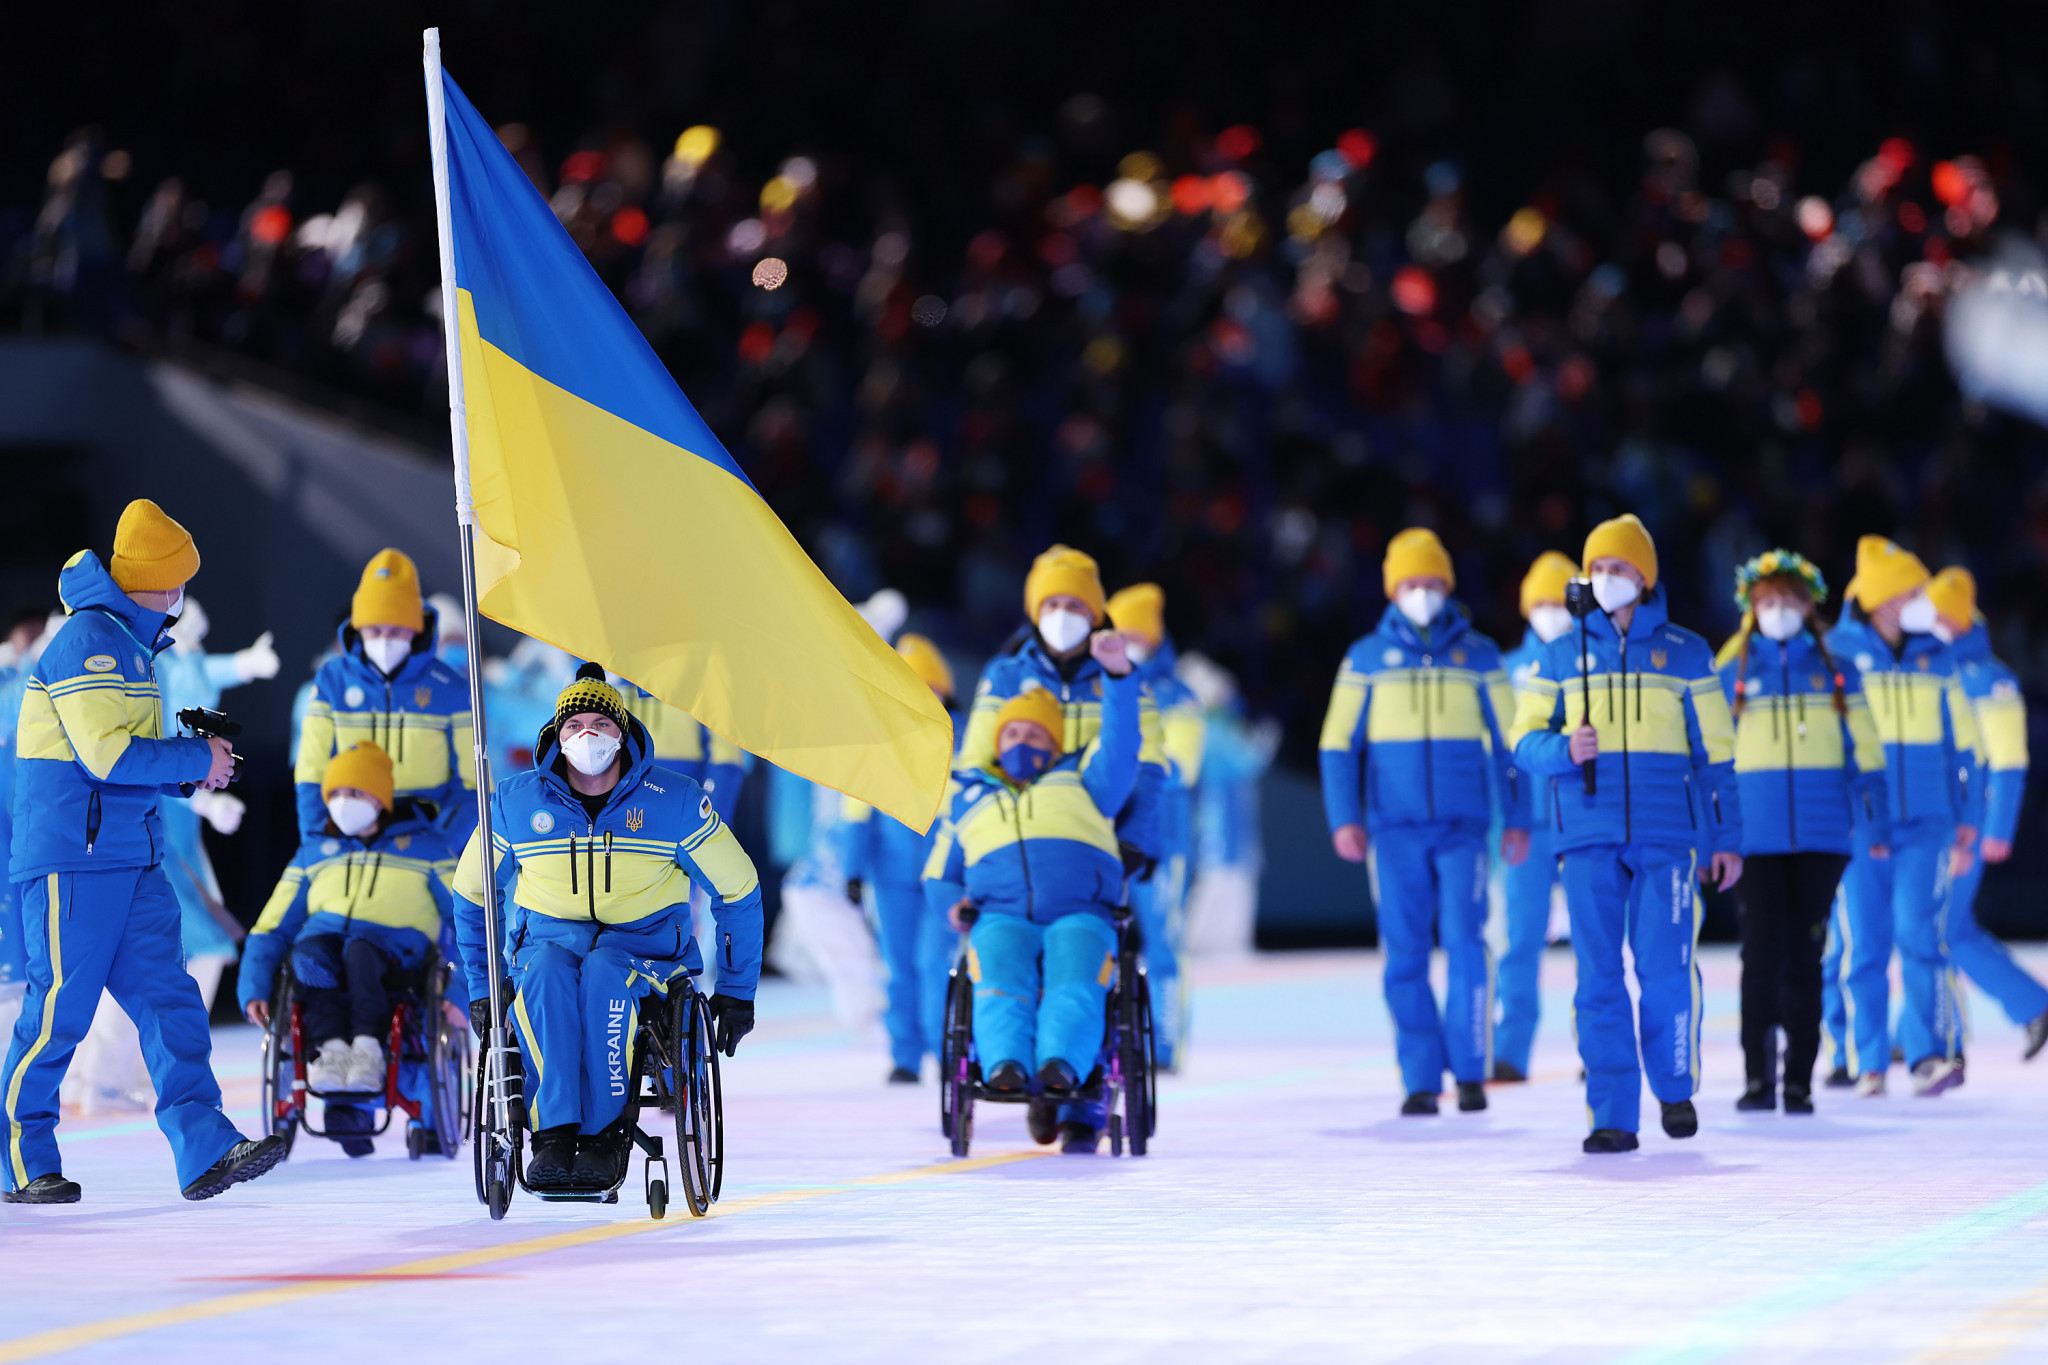 Ukraine's Beijing 2022 Paralympic team are among the contenders for The Visa Award ©Getty Images